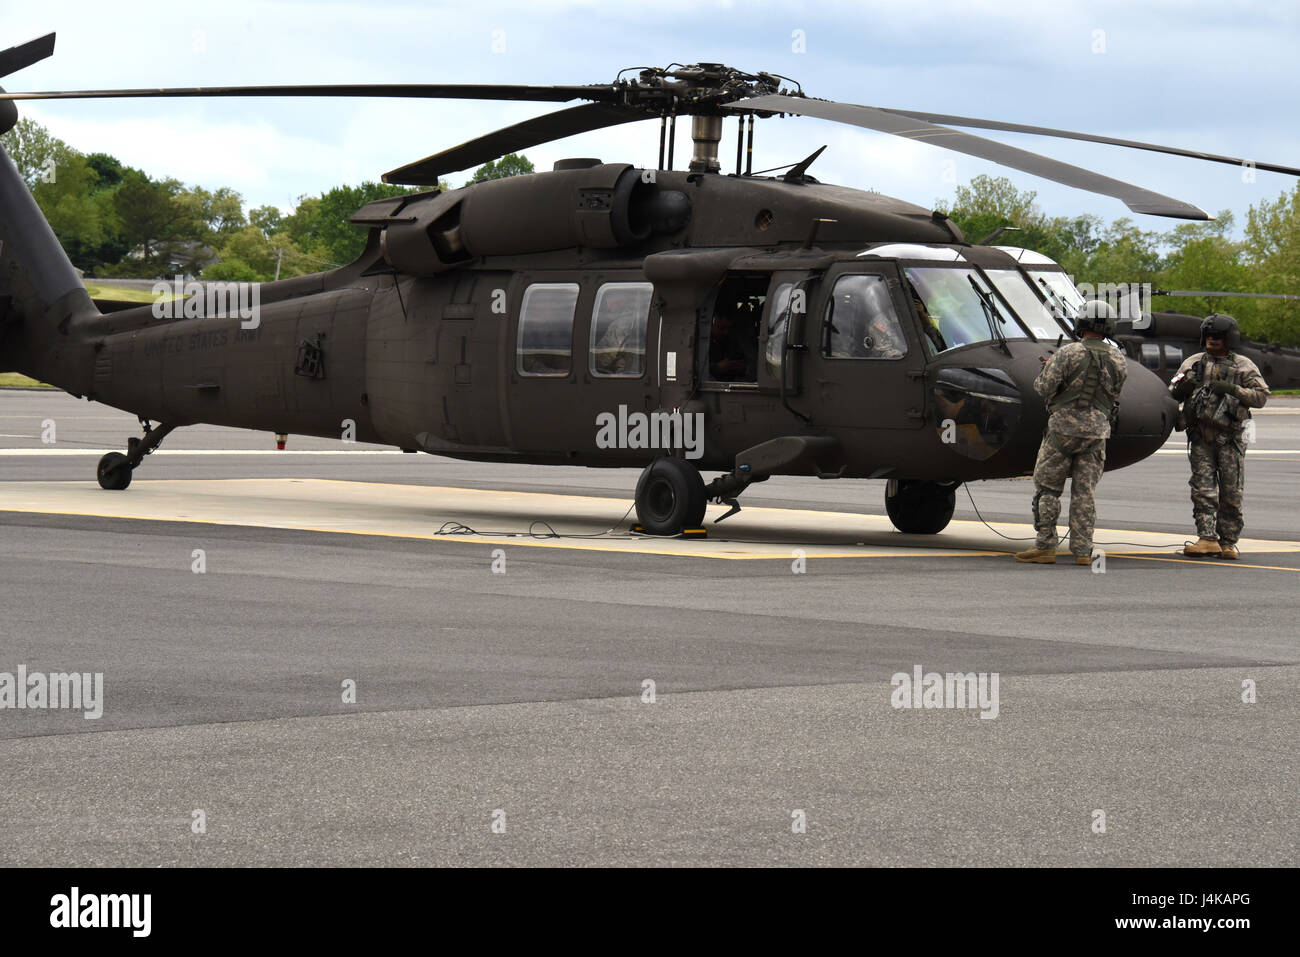 ARMY AVIATION SUPPORT FACILITY, Del. -  Members of the 238th Army Aviation Regiment, Delaware National Guard, prepare for departure to the Joint Base McGuire-Dix Lakehurst, N.J. on May 7, 2017. A four-ship formation of Blackhawk helicopters from the 238th provided airlift of approximately 40 security forces personnel from the DNG Army Aviation Support Facility to Fort Dix. Delaware Air National Guard security defenders will spend eleven days conducting annual training in areas such as: urban combat training, combat life saver training, self-aid buddy care, and weapons qualifications training a Stock Photo